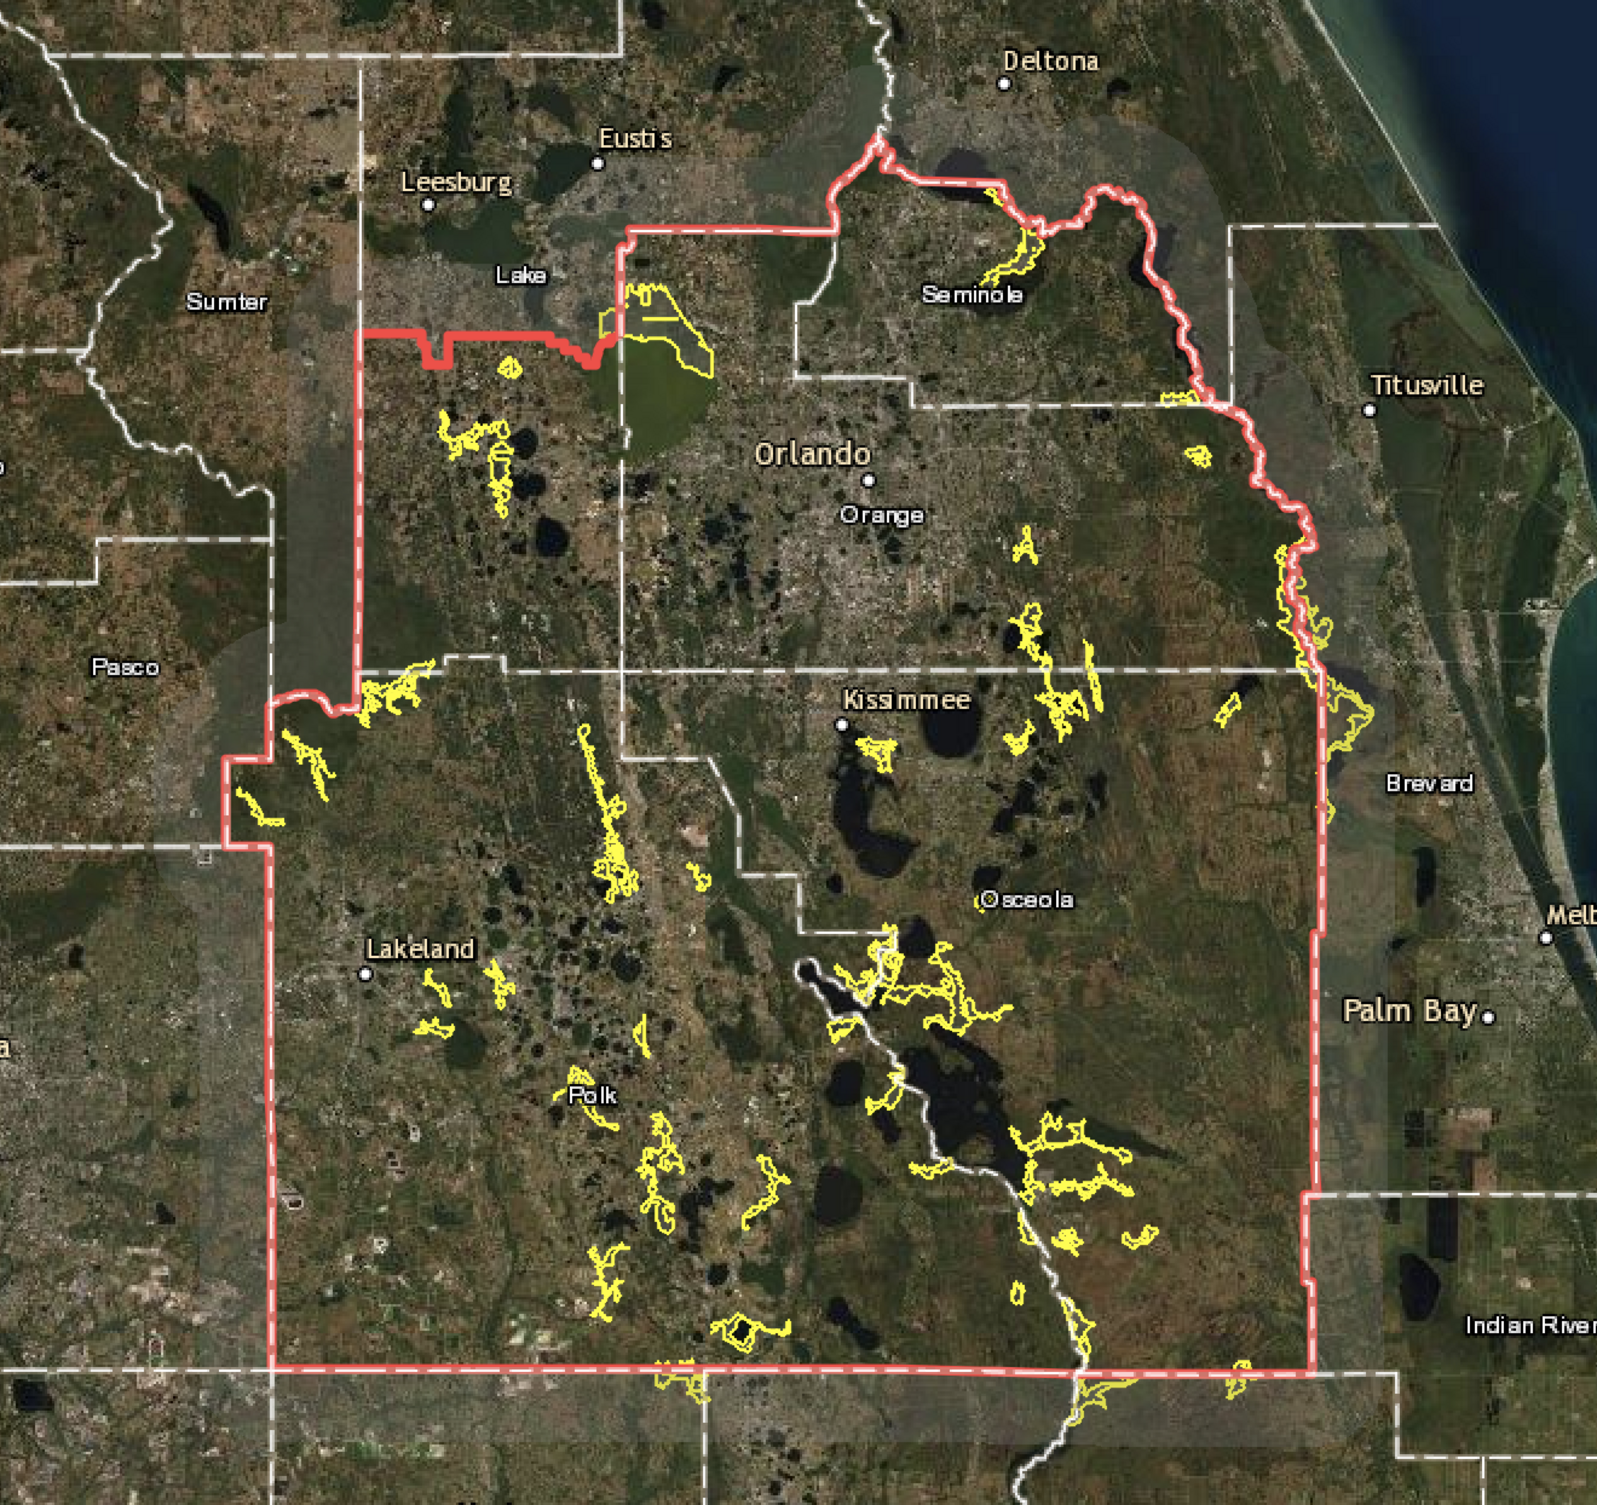 AUDUBON'S NEW MAPPING TOOL CAN PROTECT WATER IN THE ORLANDO REGION